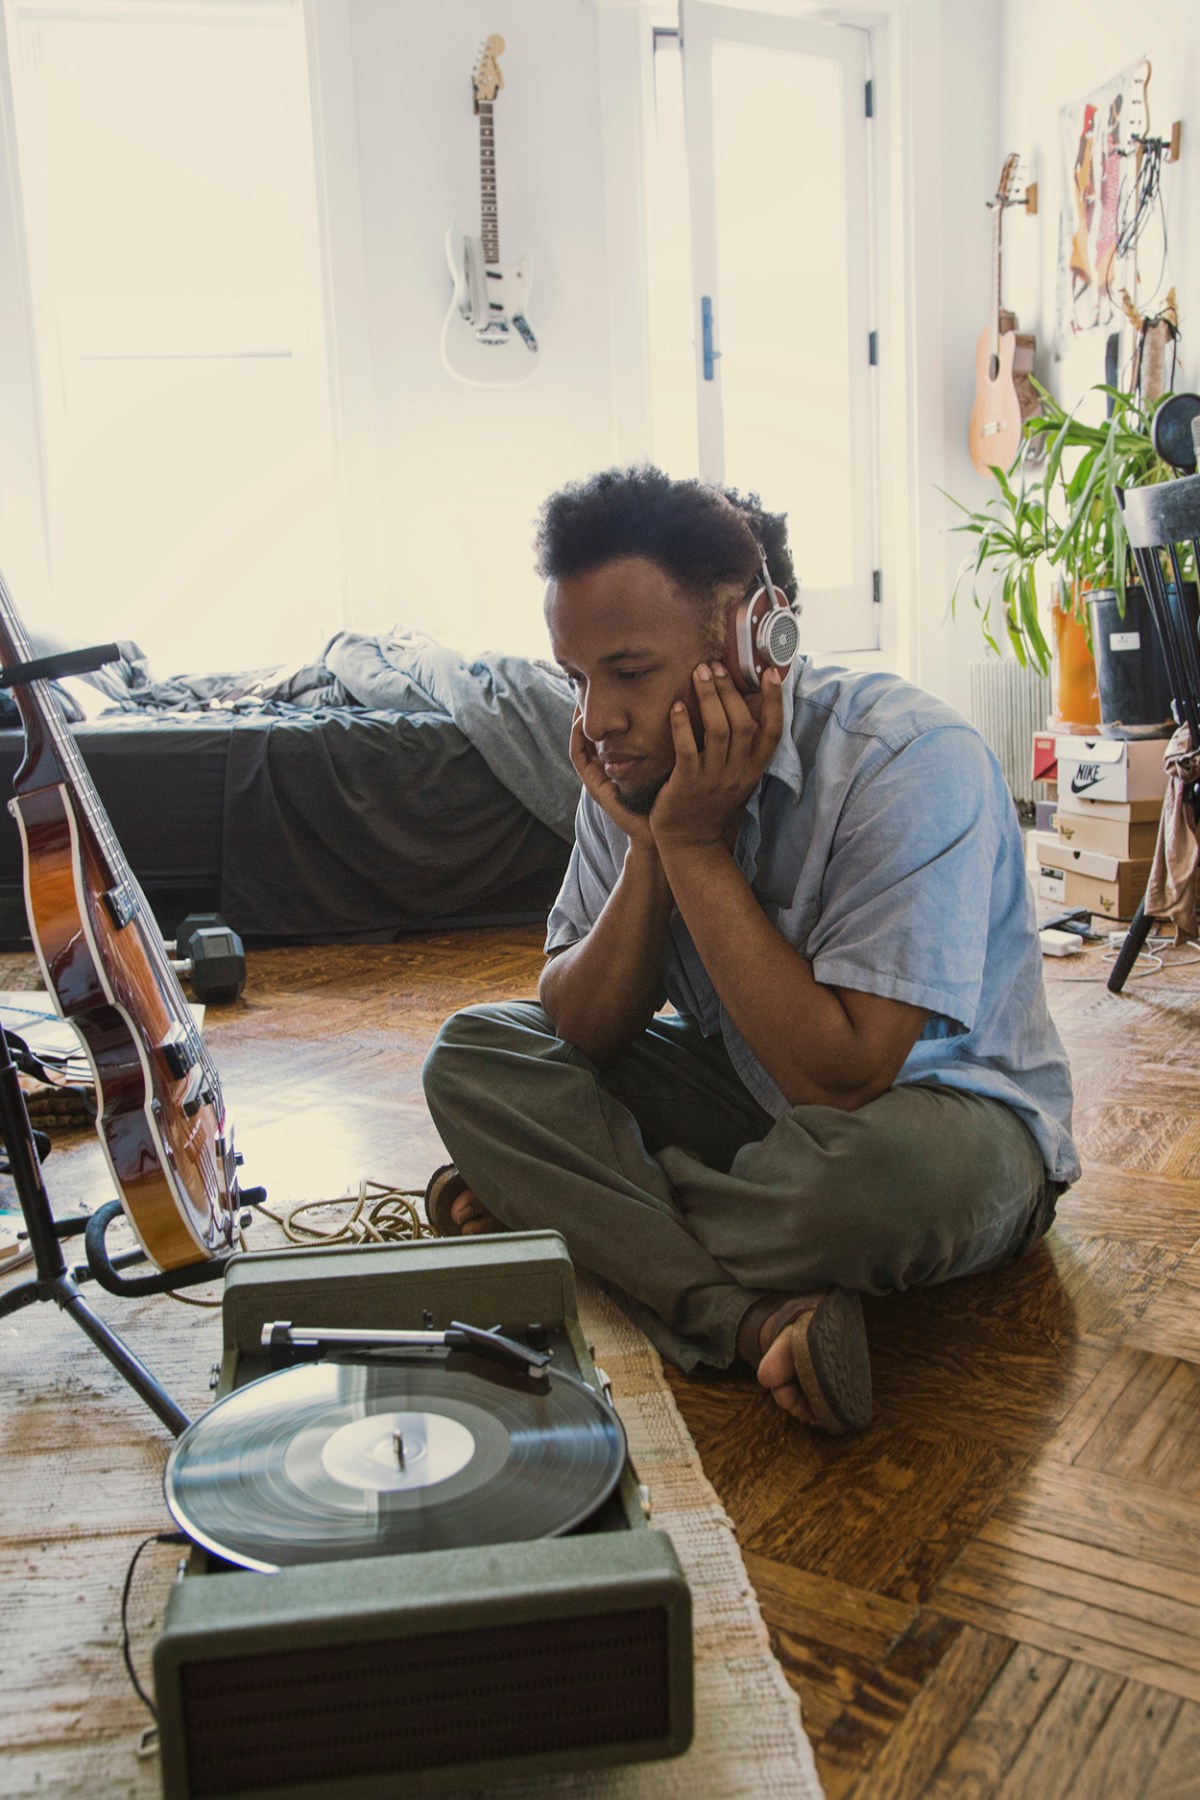 Photograph of Cautious Clay sitting on the floor wearing Master and Dynamic Headphones